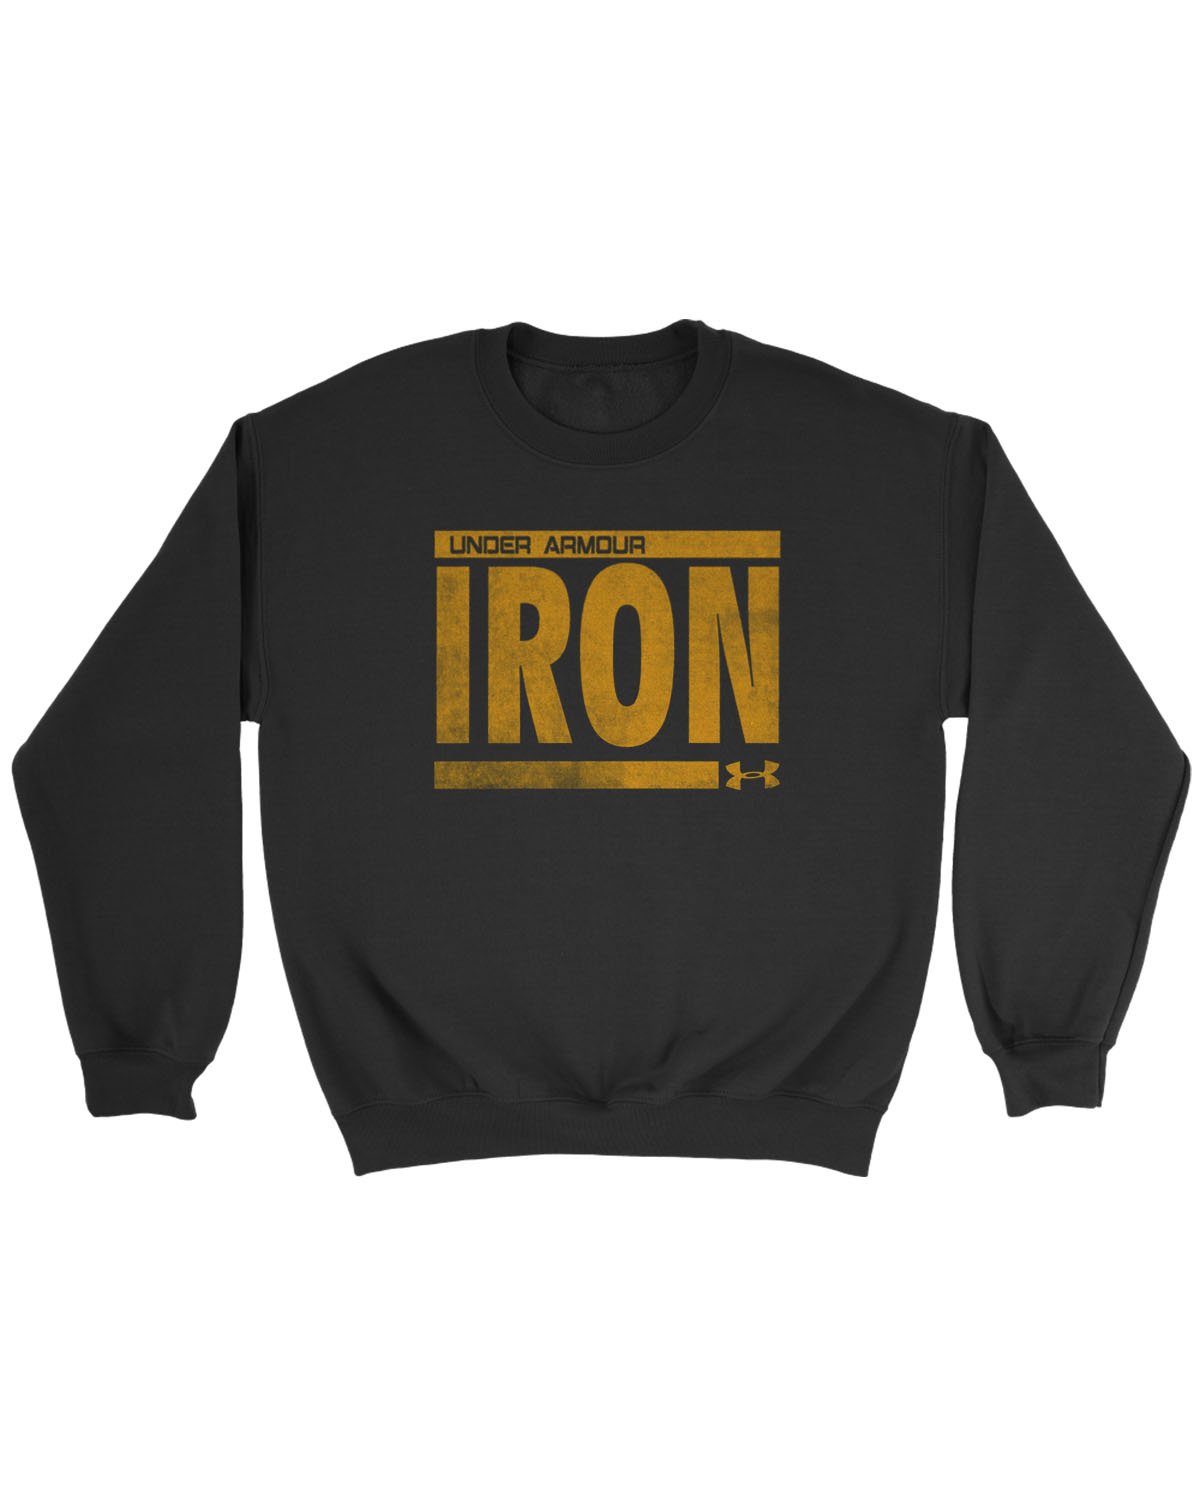 Under Armour Iron The Rock Project Sweatshirt